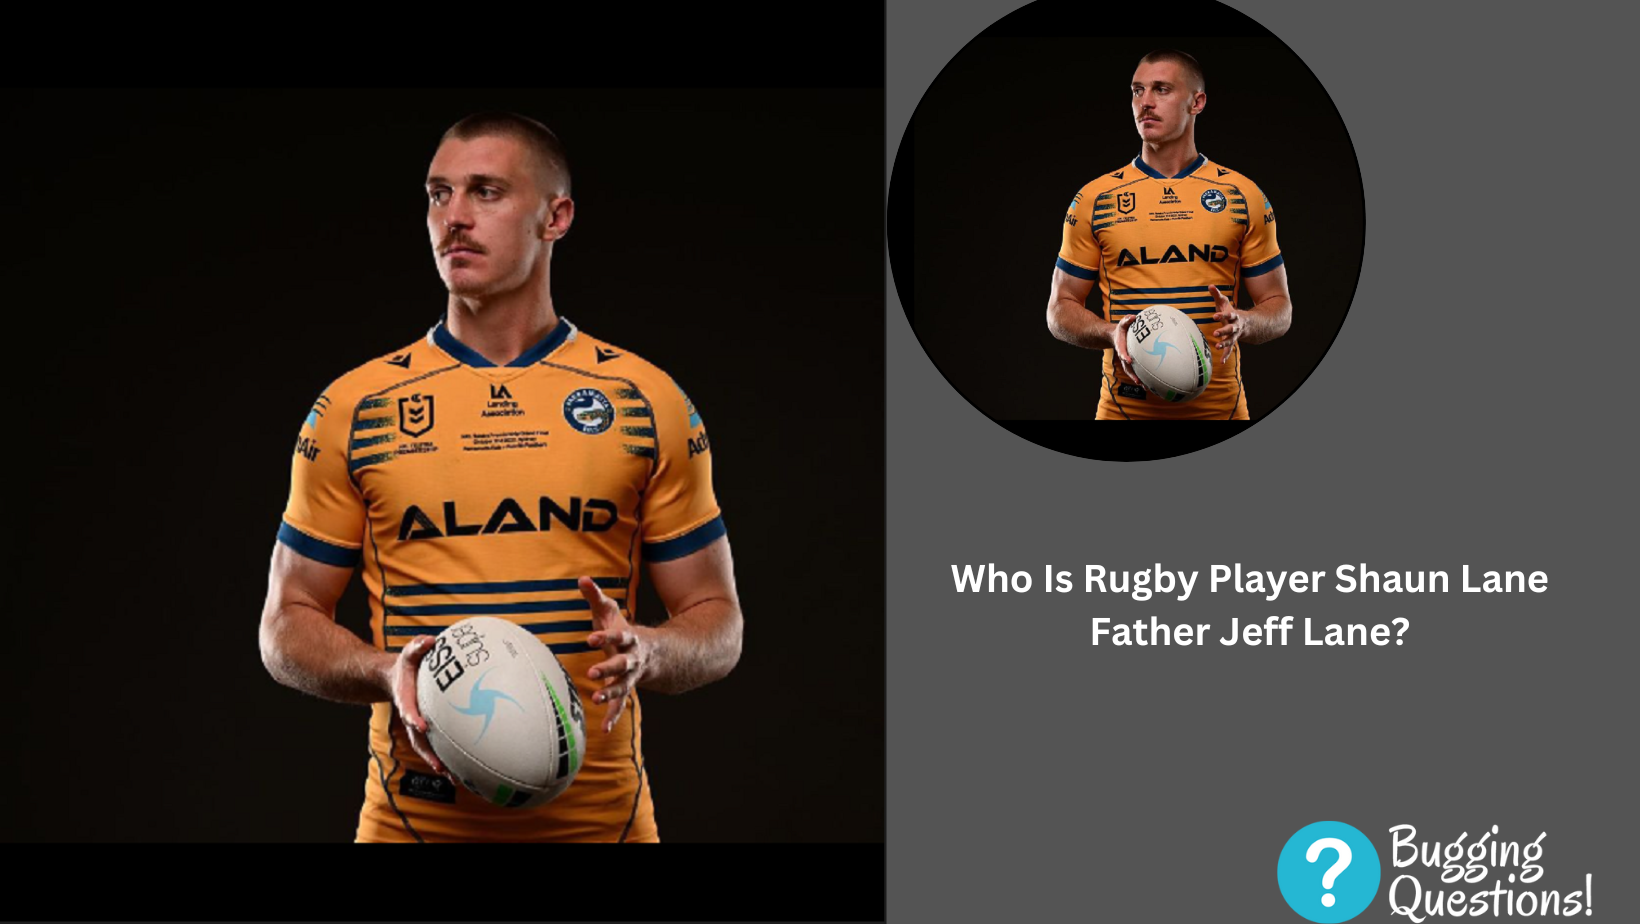 Who Is Rugby Player Shaun Lane Father Jeff Lane?